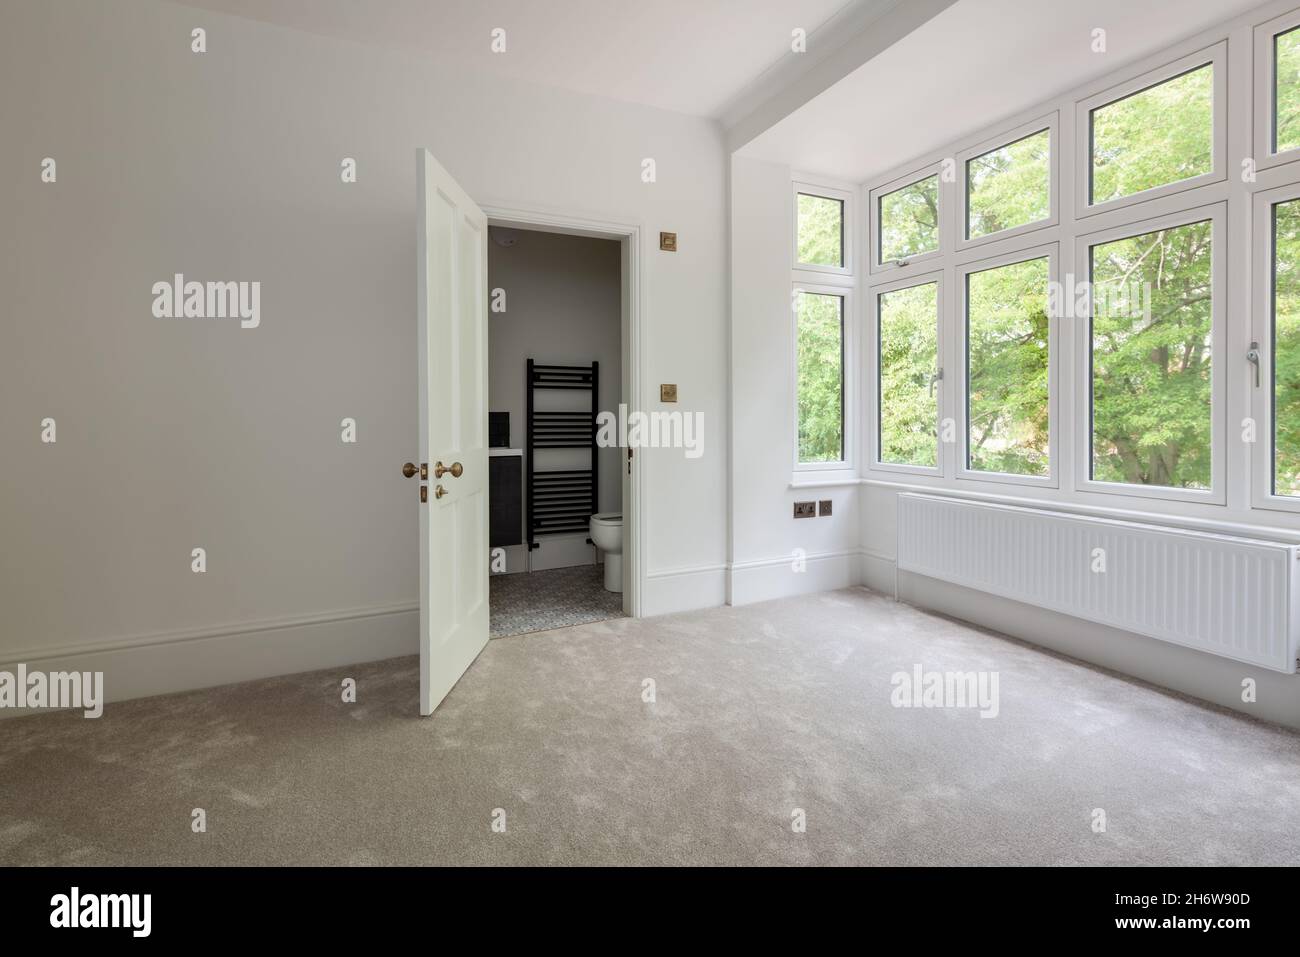 Wratting, England - August 19 2019: Empty bedroom space with door opening onto ensuite closet bathroom simply decorated in white with carpeted floor Stock Photo